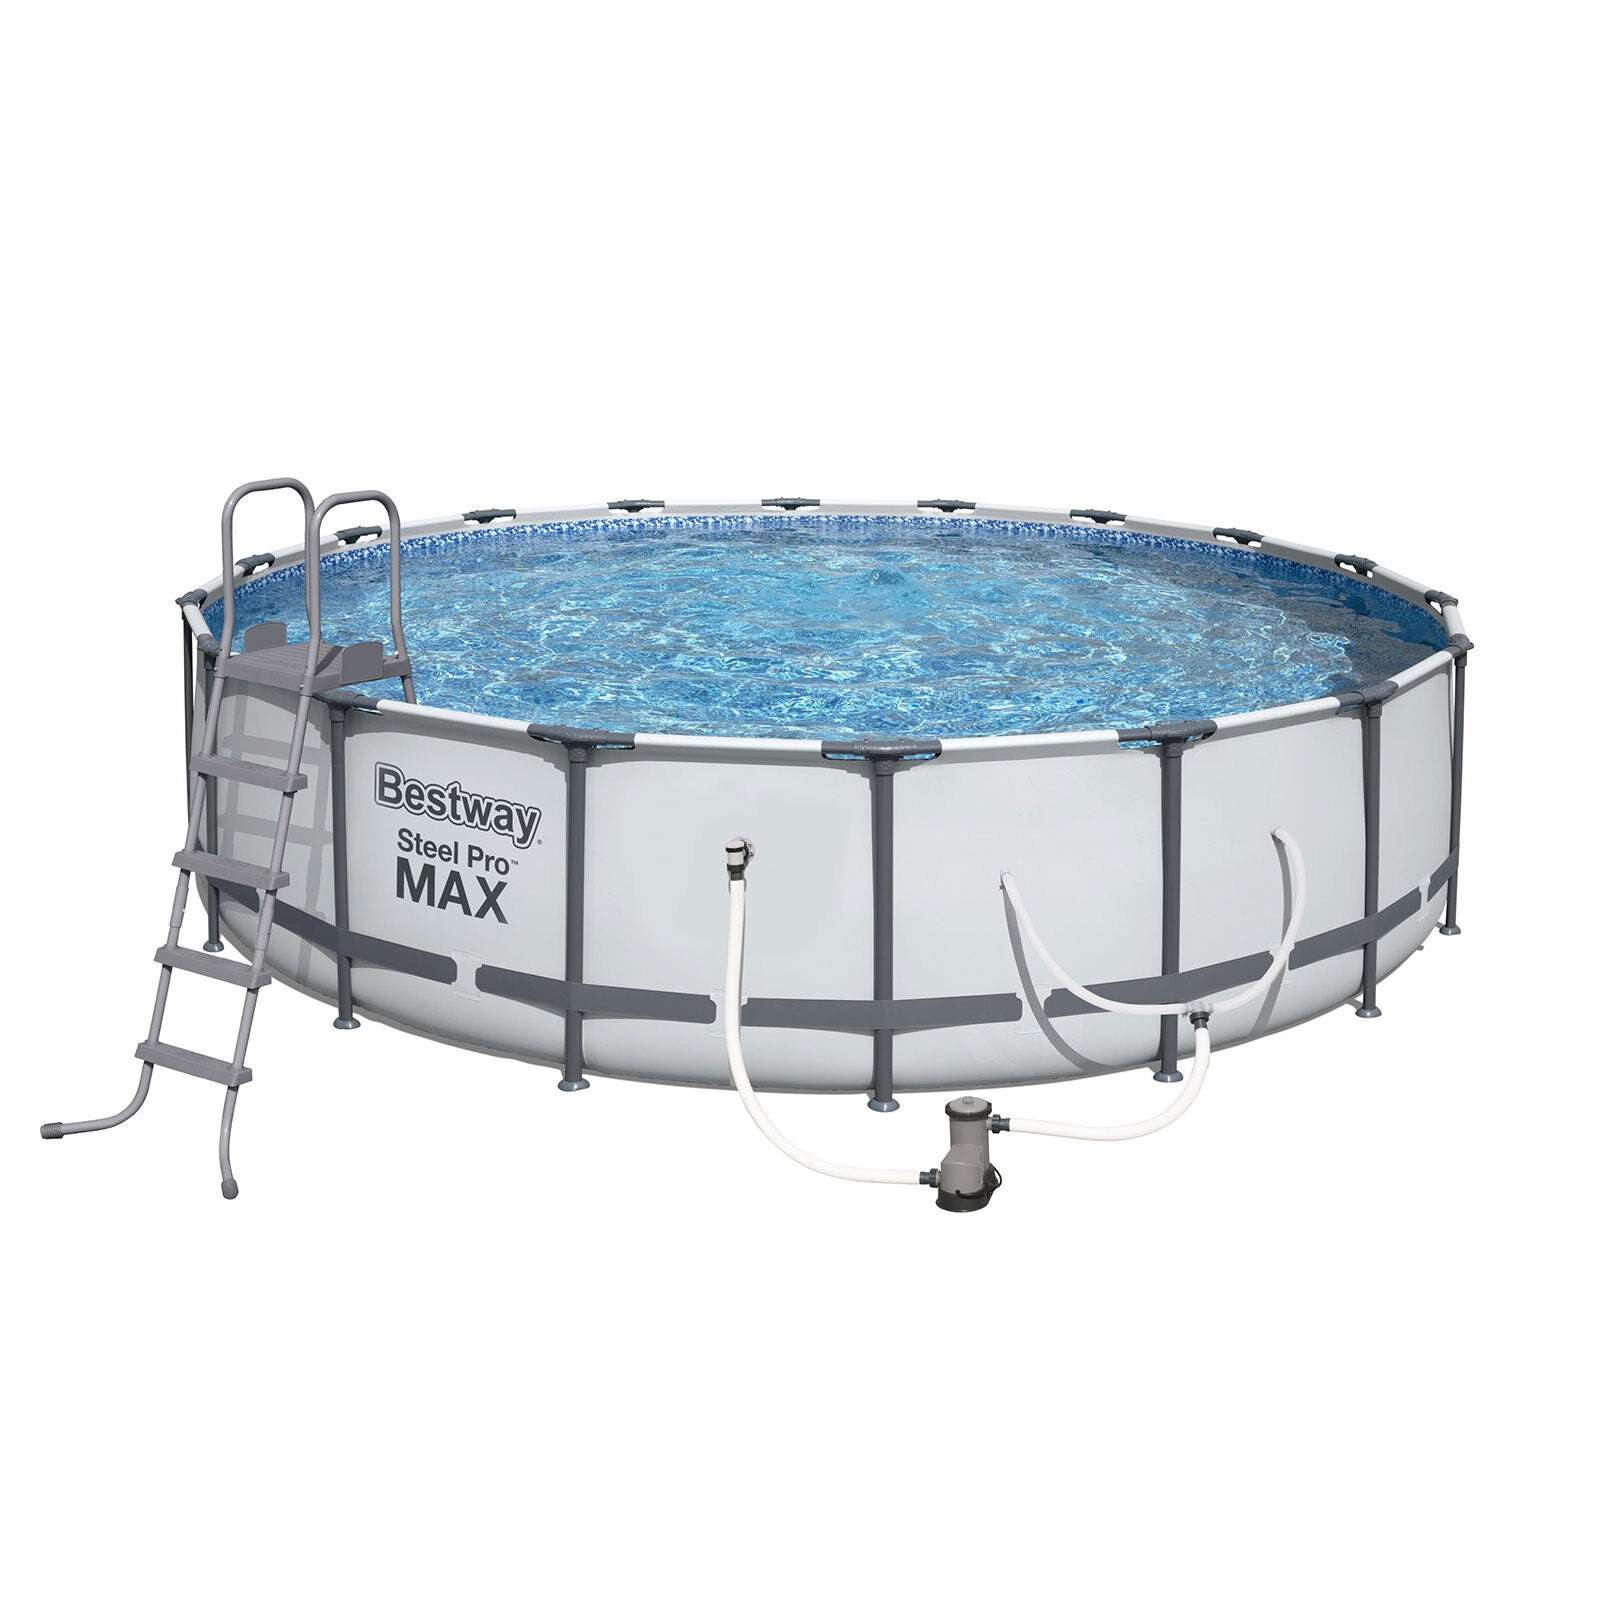 Bestway Steel Pro Frame Above Ground Swimming Pool 18ft ...